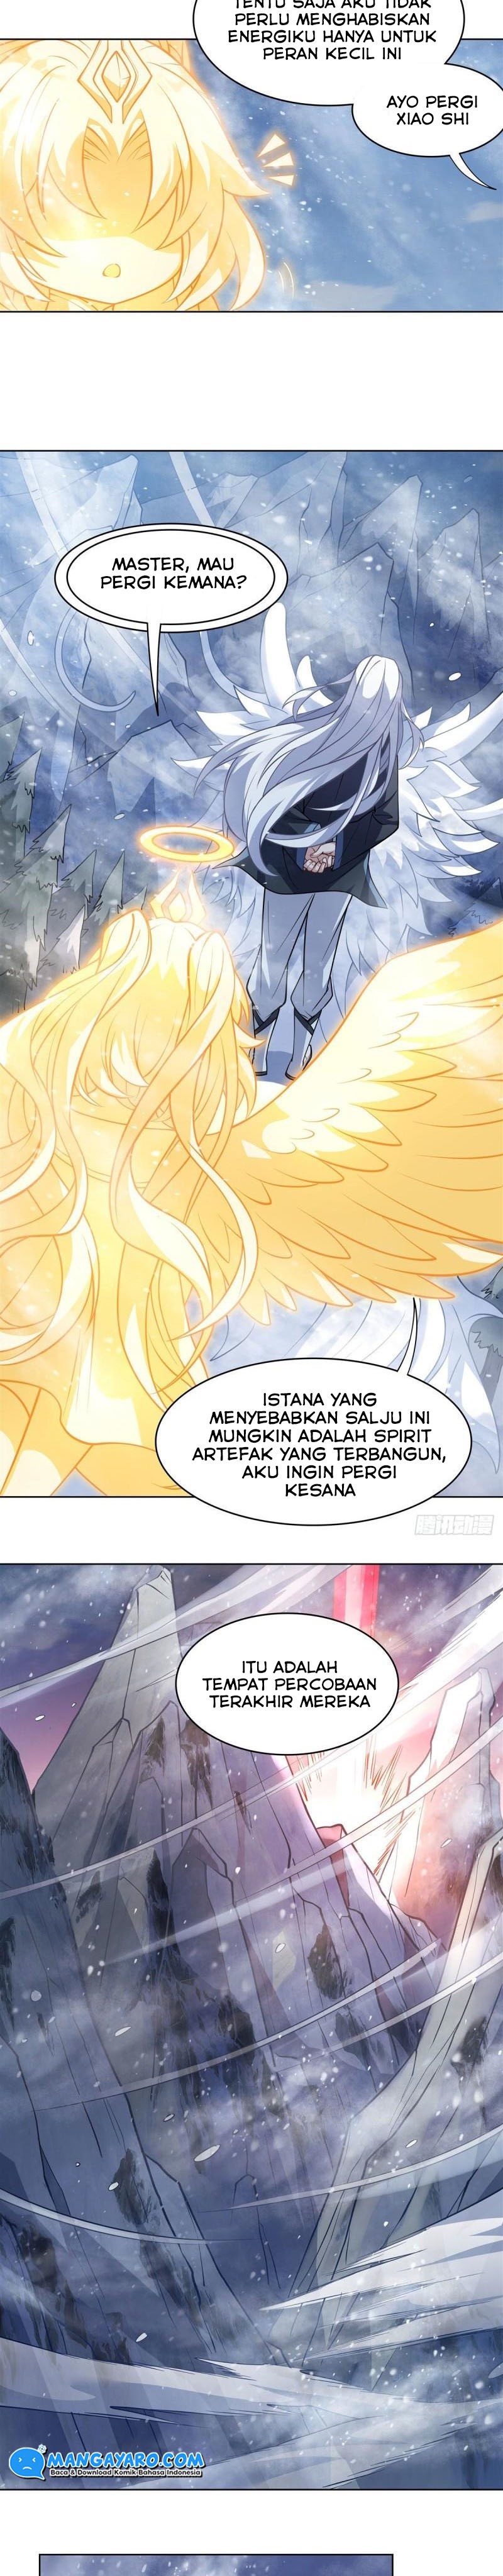 Dilarang COPAS - situs resmi www.mangacanblog.com - Komik my female apprentices are all big shots from the future 051 - chapter 51 52 Indonesia my female apprentices are all big shots from the future 051 - chapter 51 Terbaru 17|Baca Manga Komik Indonesia|Mangacan